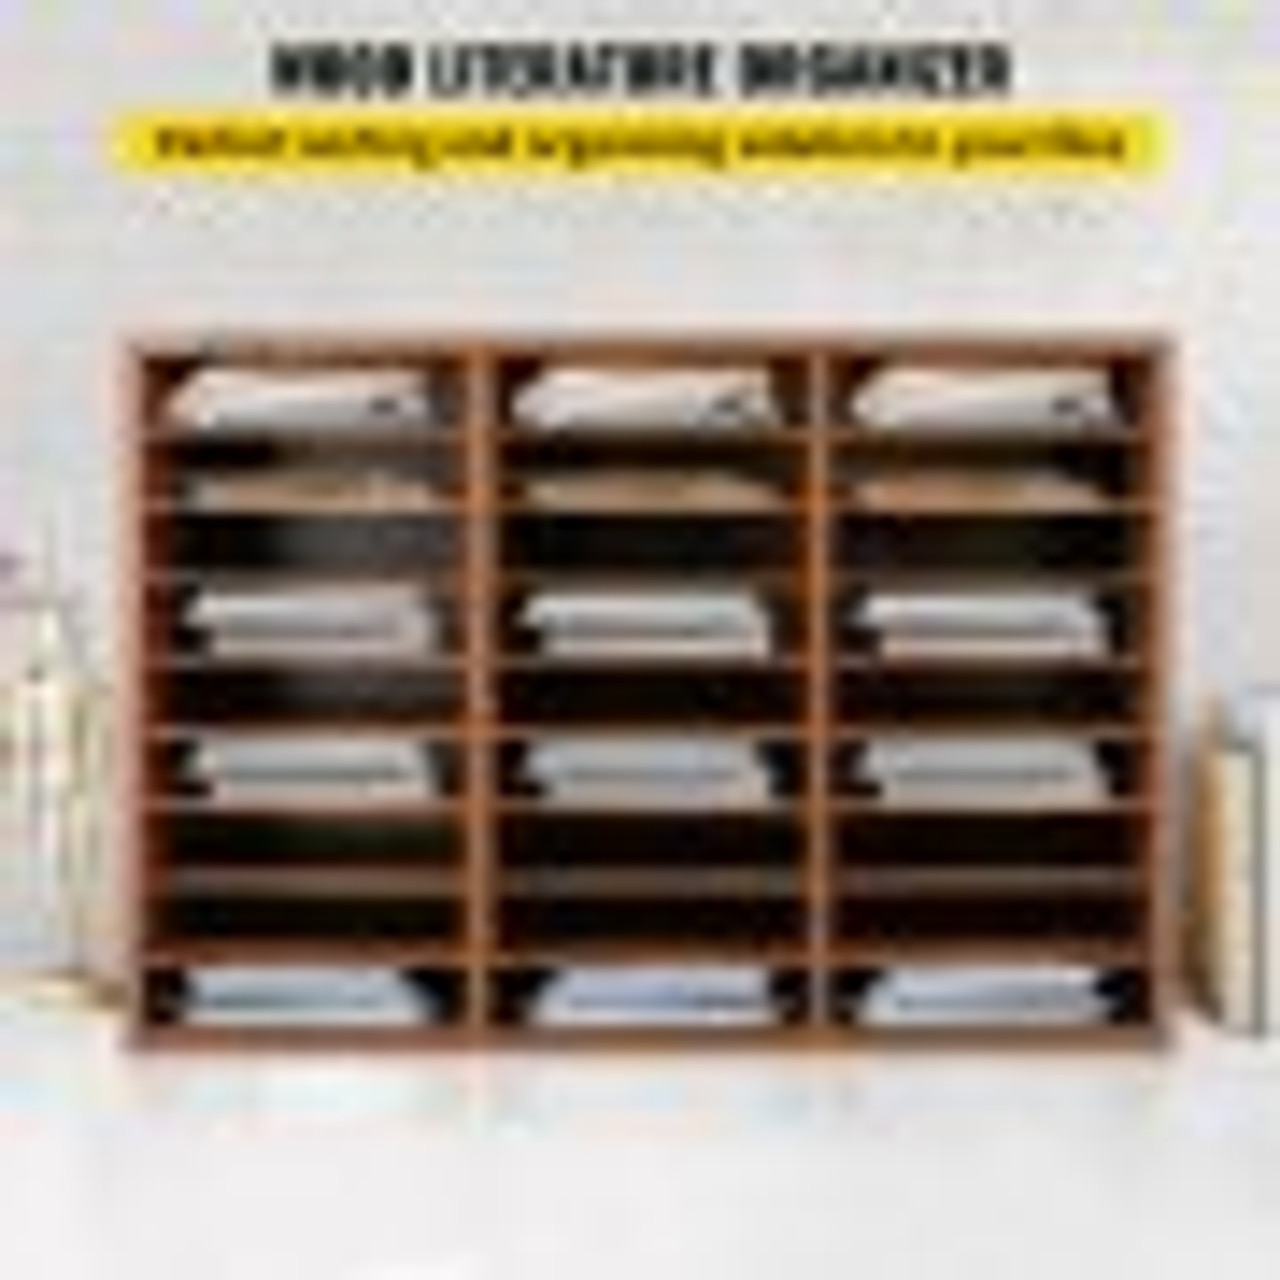 27 Compartments Wood Literature Organizer, Adjustable Shelves, Medium Density Fiberboard Mail Center, Office Home School Storage for Files, Documents, Papers, Magazines, Brown